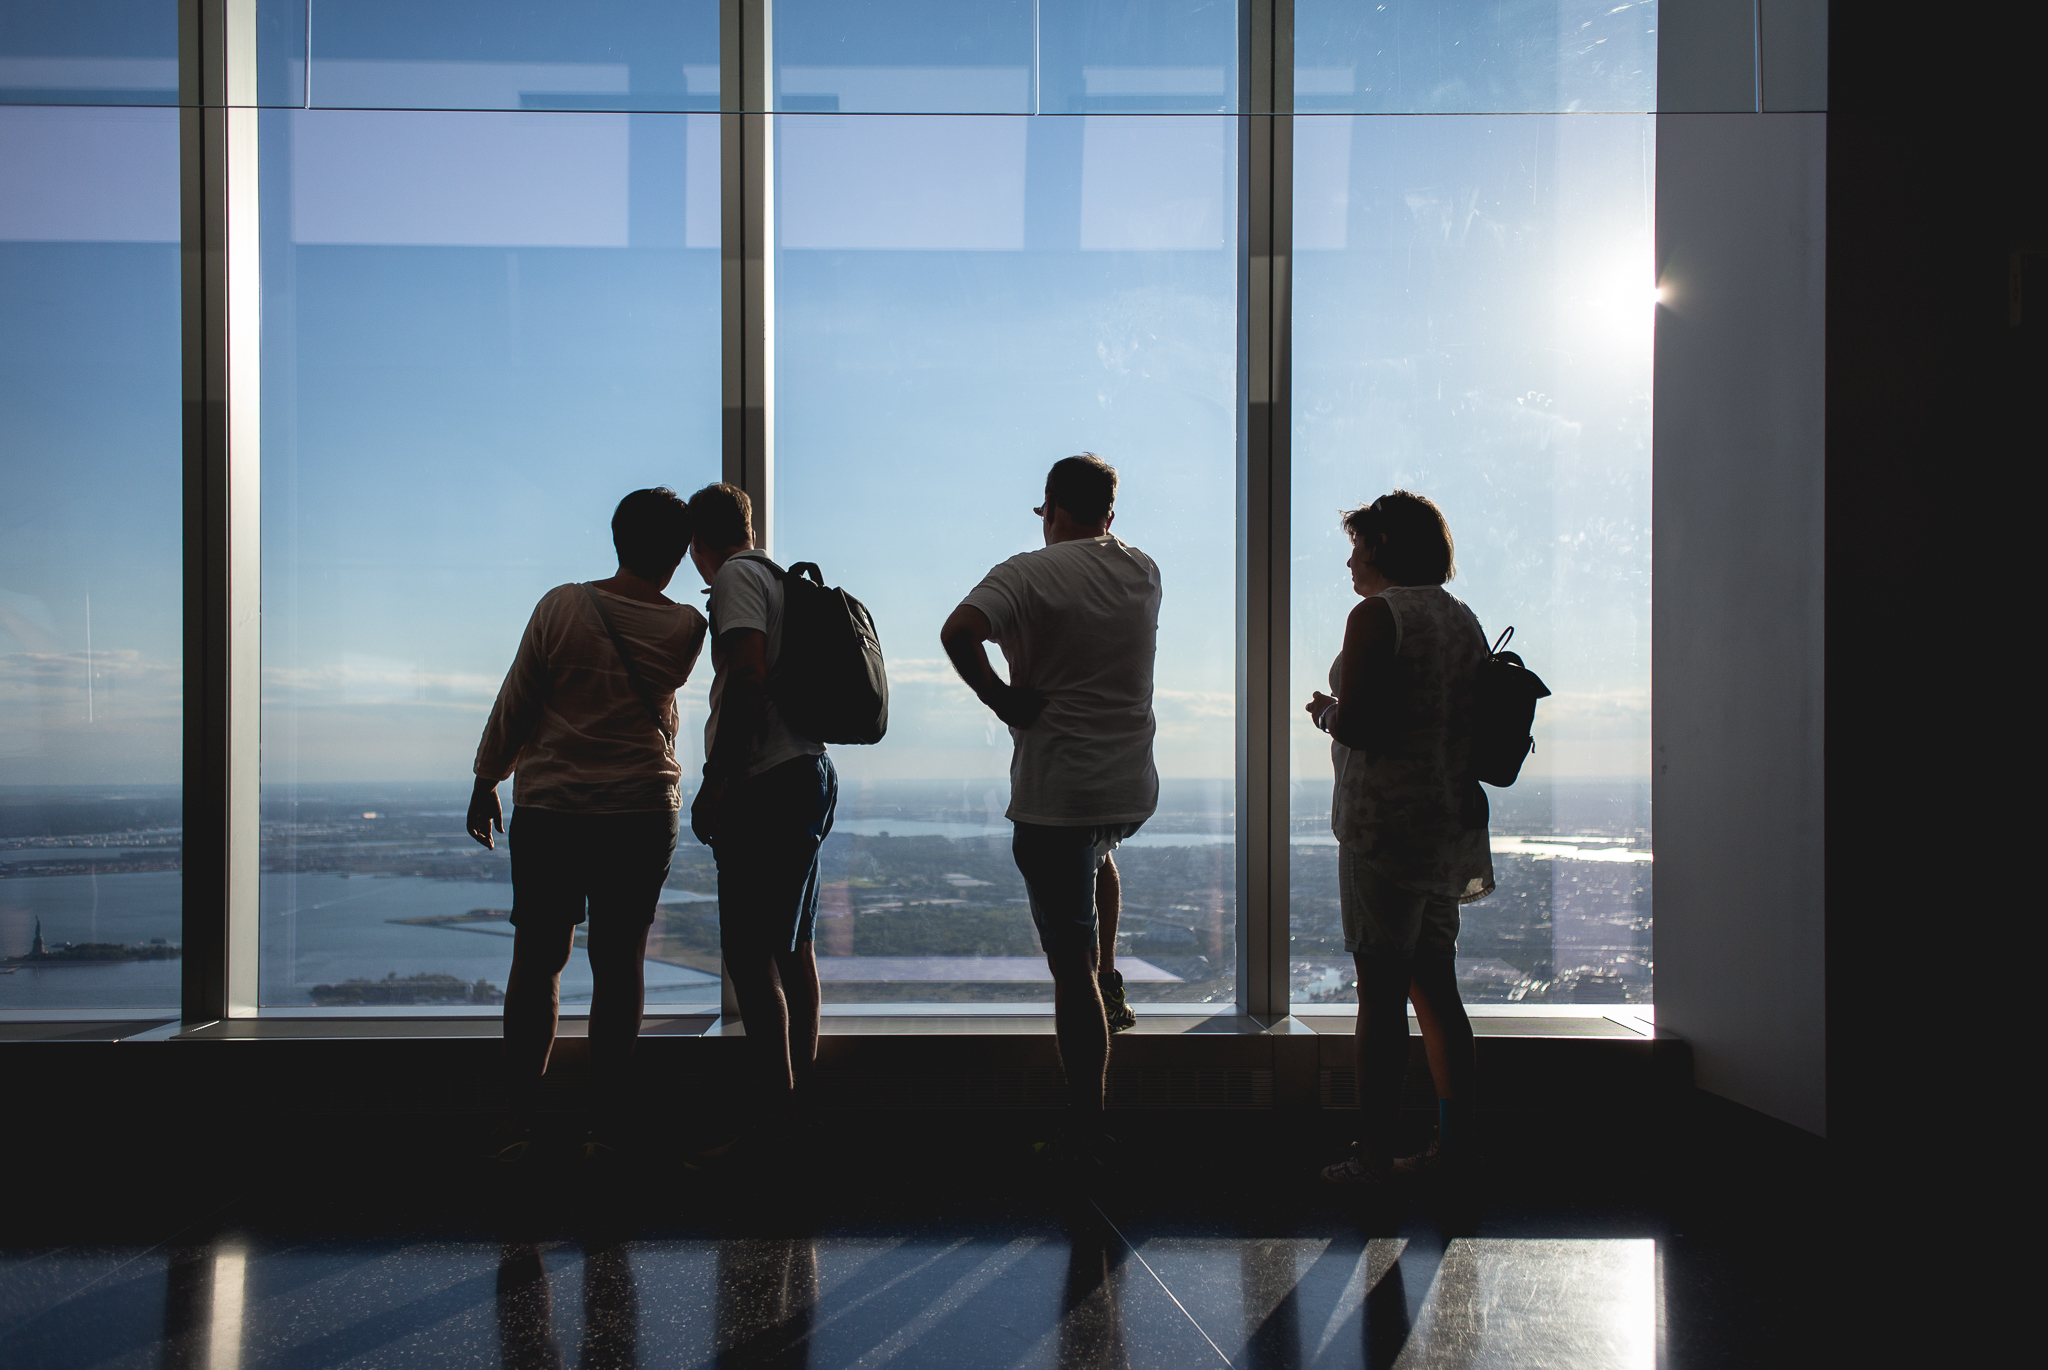 Onlookers at the World Trade Center observatory.